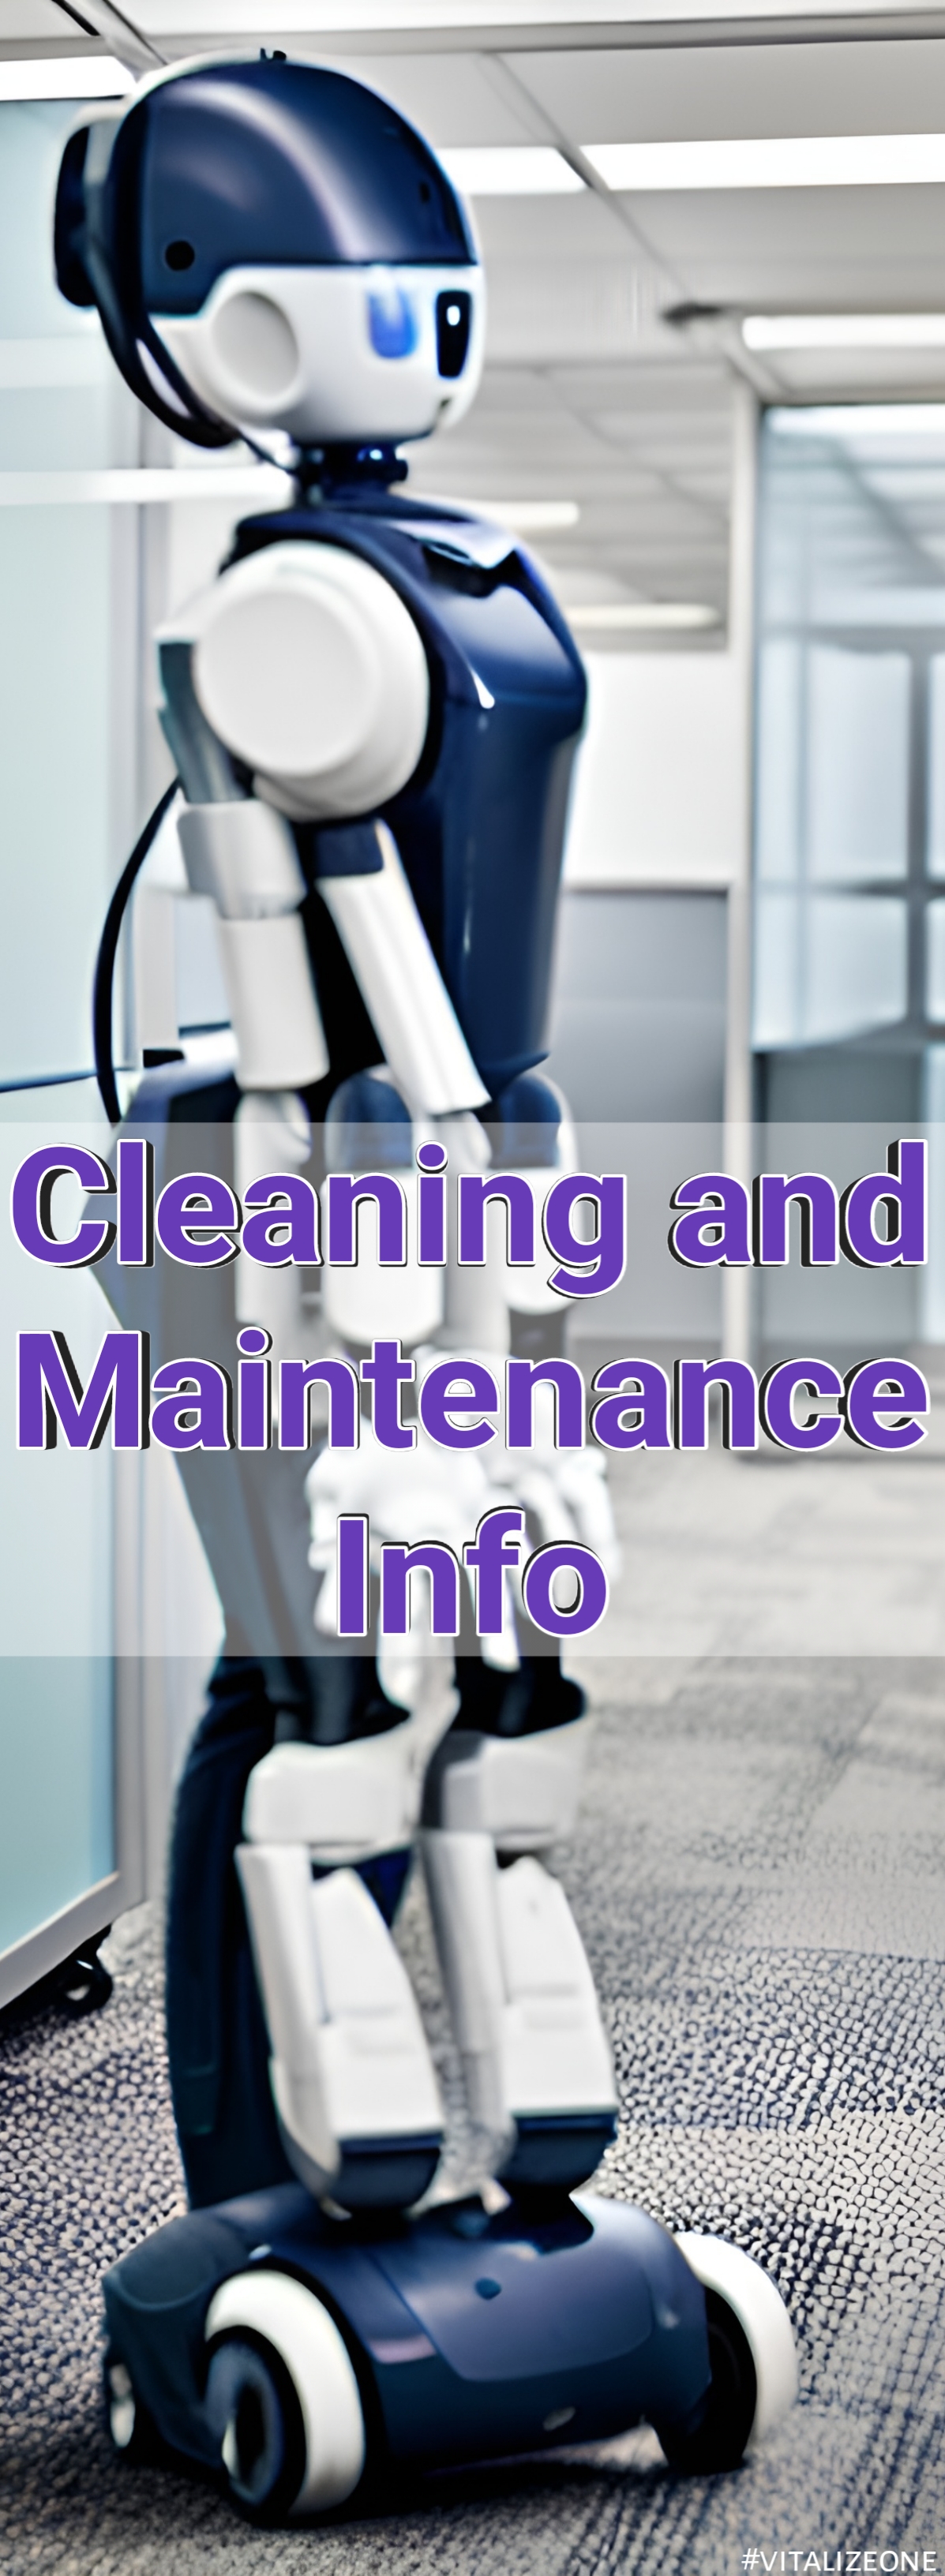 What You Need To Consider When Hiring An In-House Cleaning and Maintenance Team | #vitalizeone | VitalyTennant.com